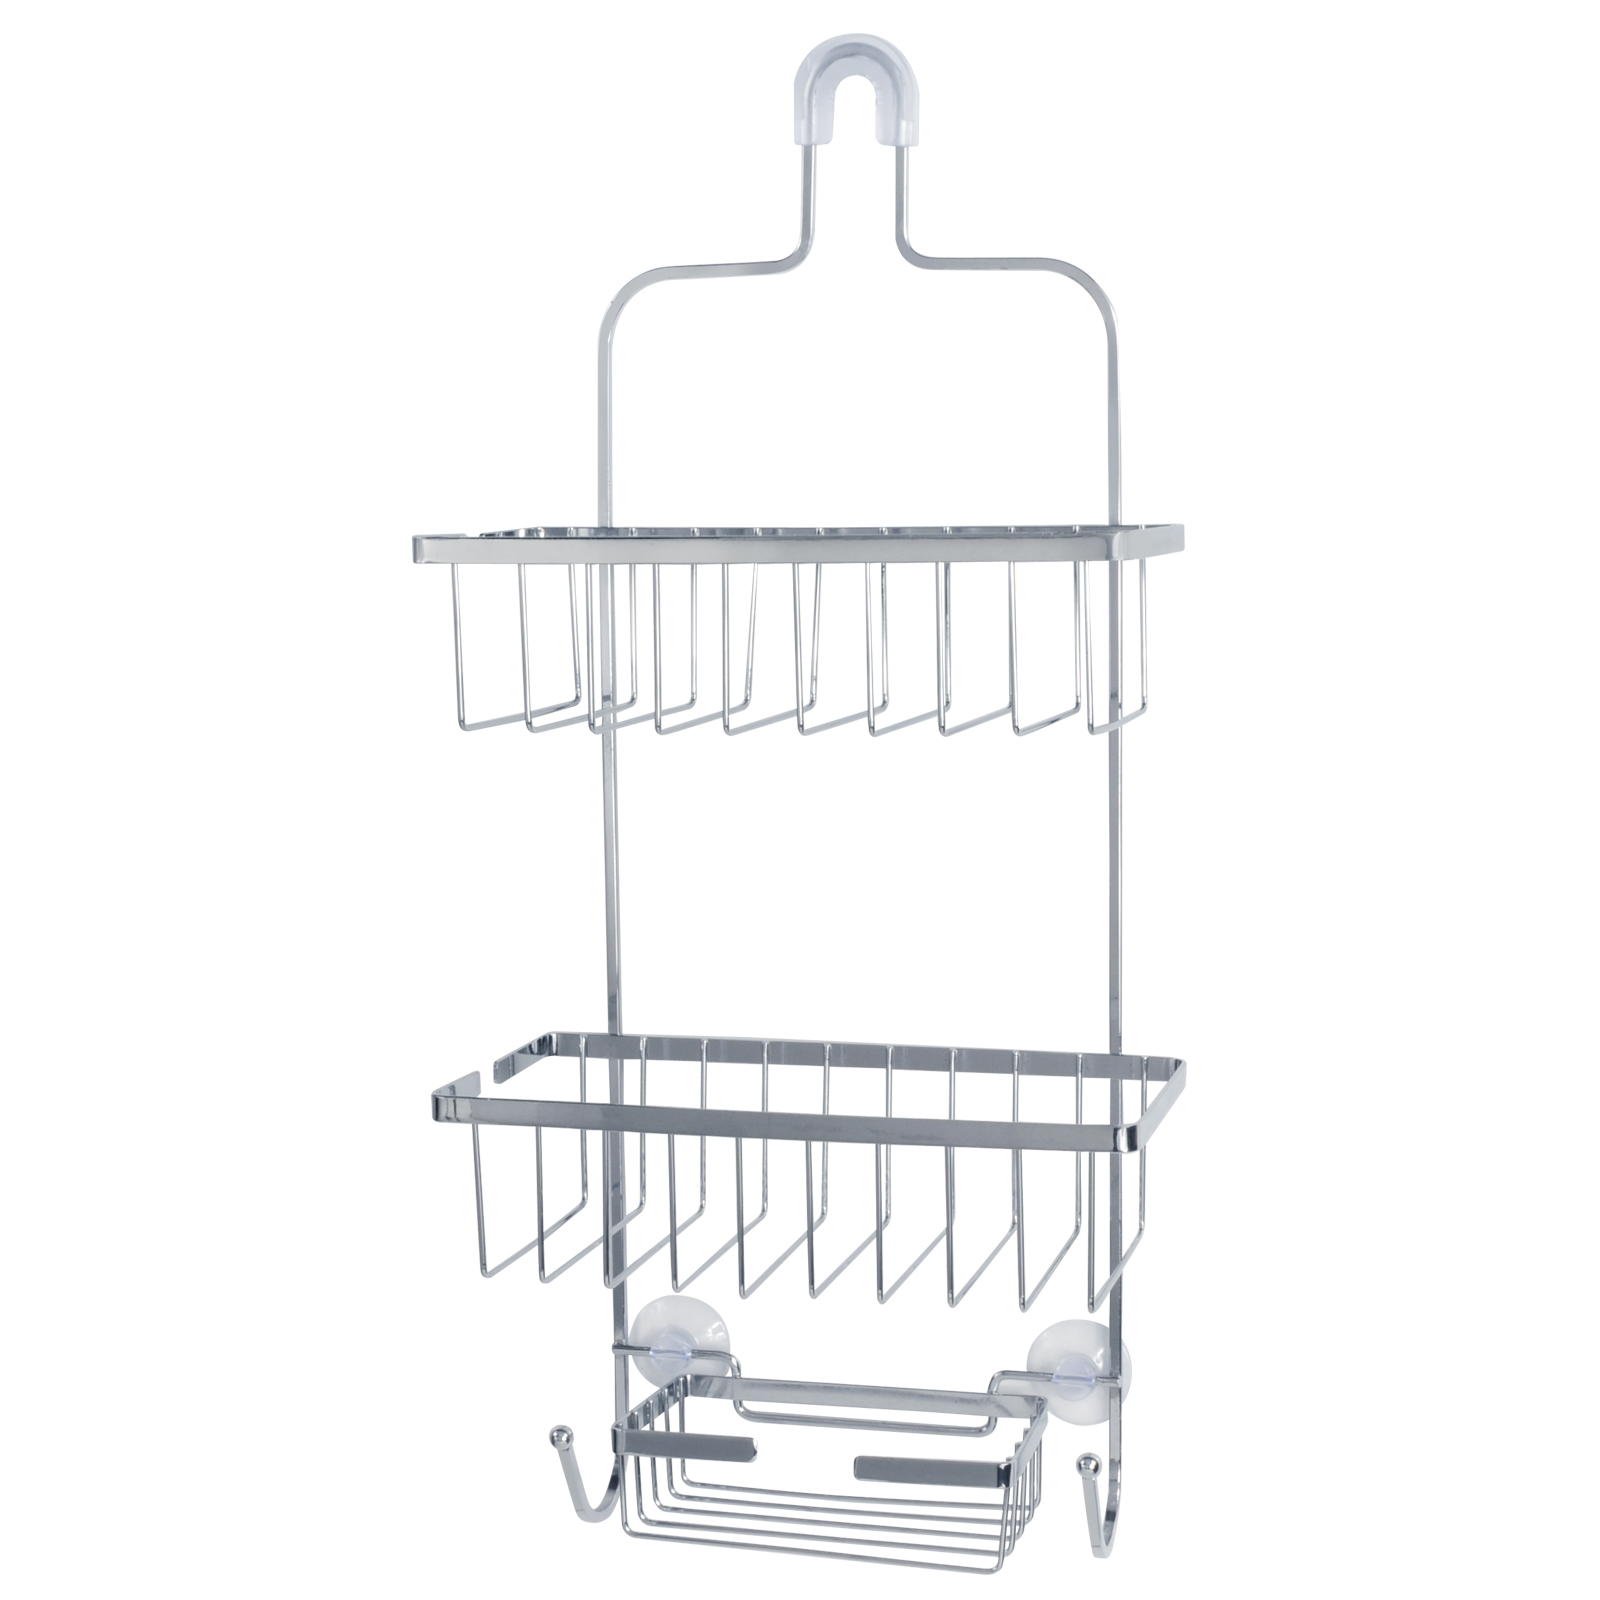 0019442516031 - DELUXE LARGE SHOWER CADDY WITH THREE BASKETS 2 HOOKS AND 2 SUCTION CUPS CHROME FINISH